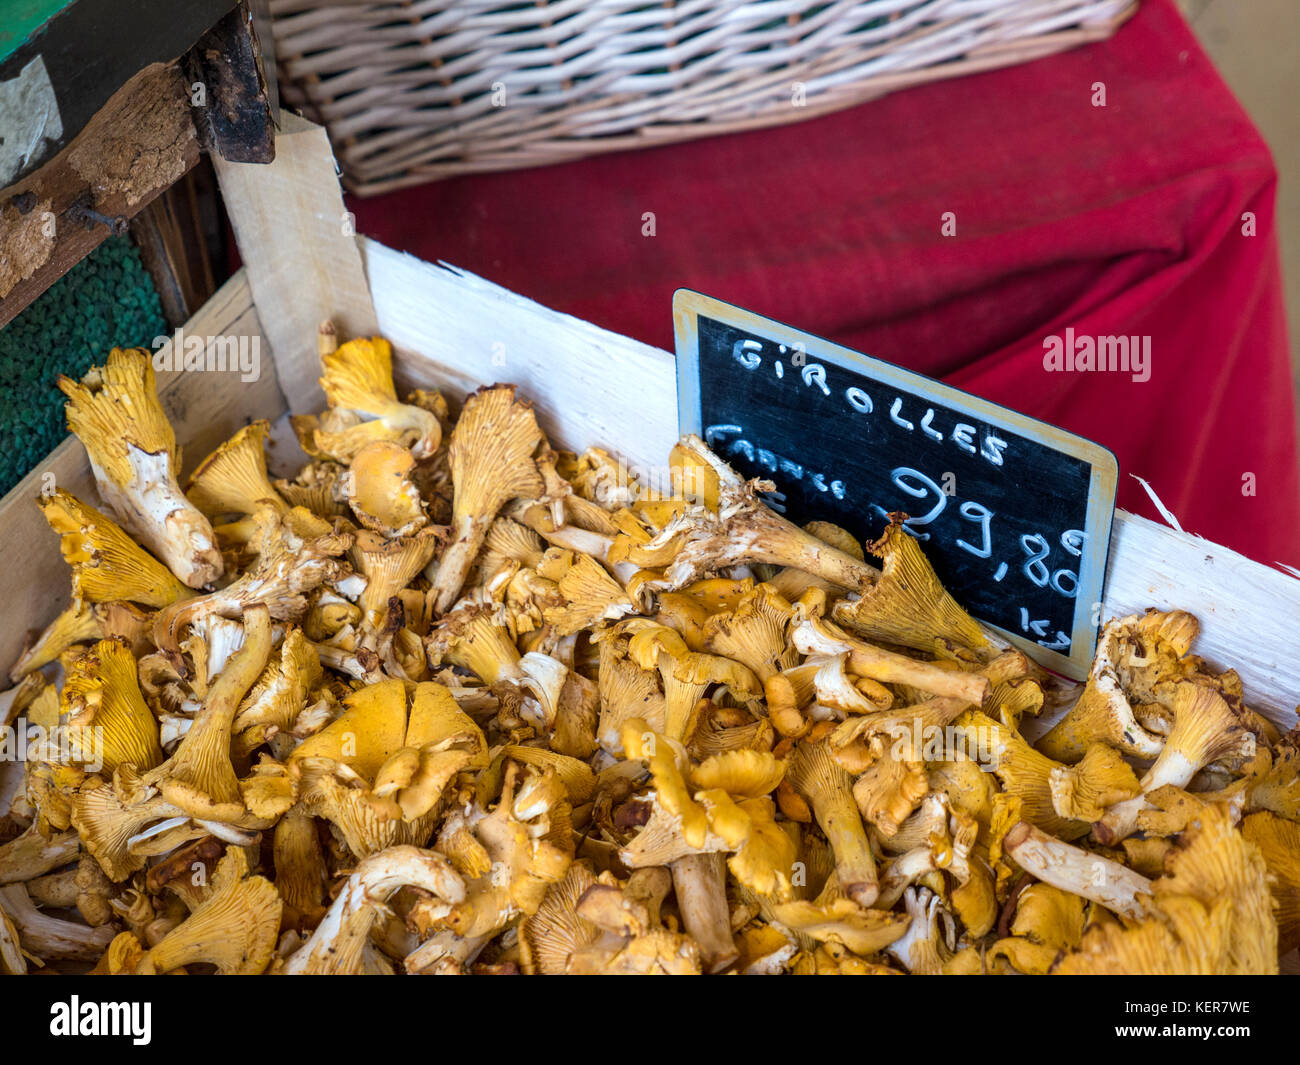 GIROLLES CHANTERELLE MUSHROOMS MARKET STALL Blackboard  price tag promoting Girolles mushrooms on sale in traditional Brittany produce market France Stock Photo